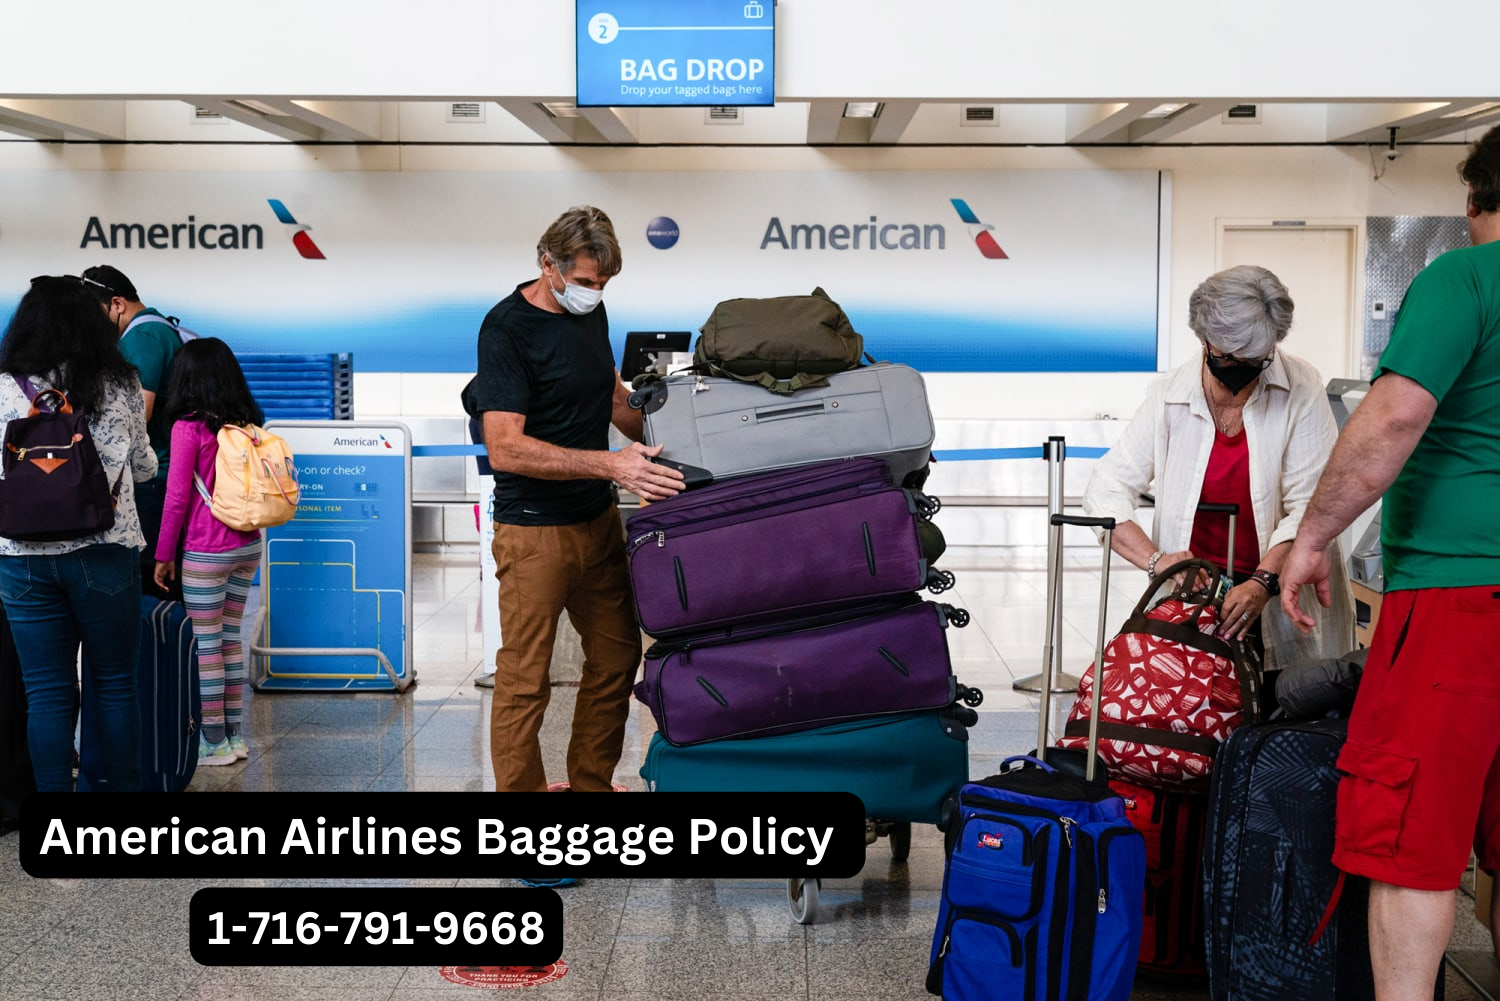 &[1–716–791–9668] American Airlines Baggage Policy